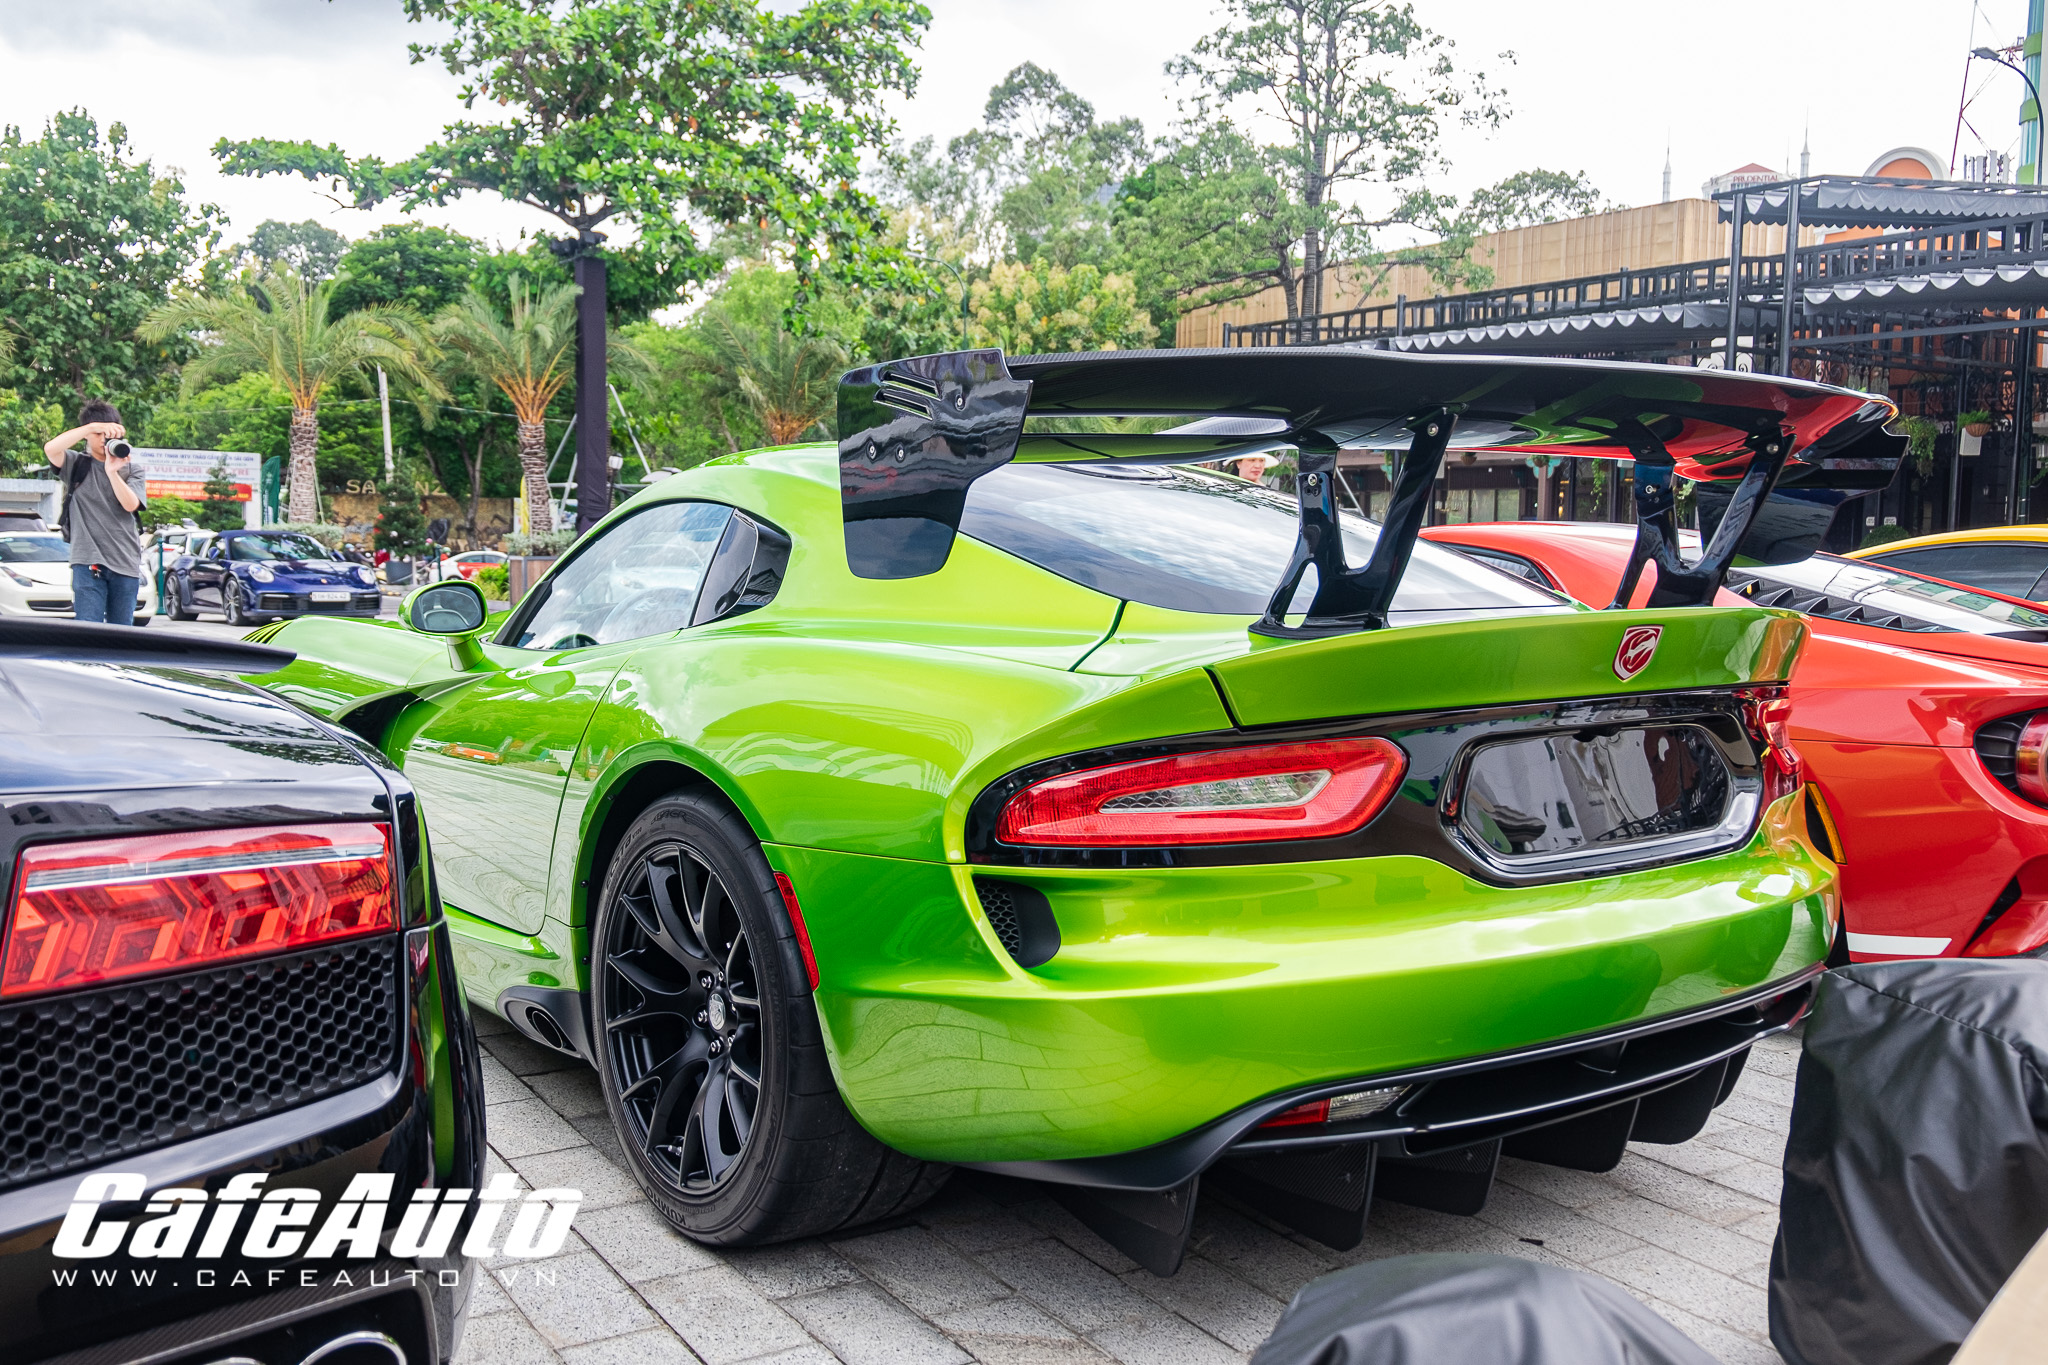 dodge-viper-acr-the-he-moi-doc-nhat-cafeautovn-9